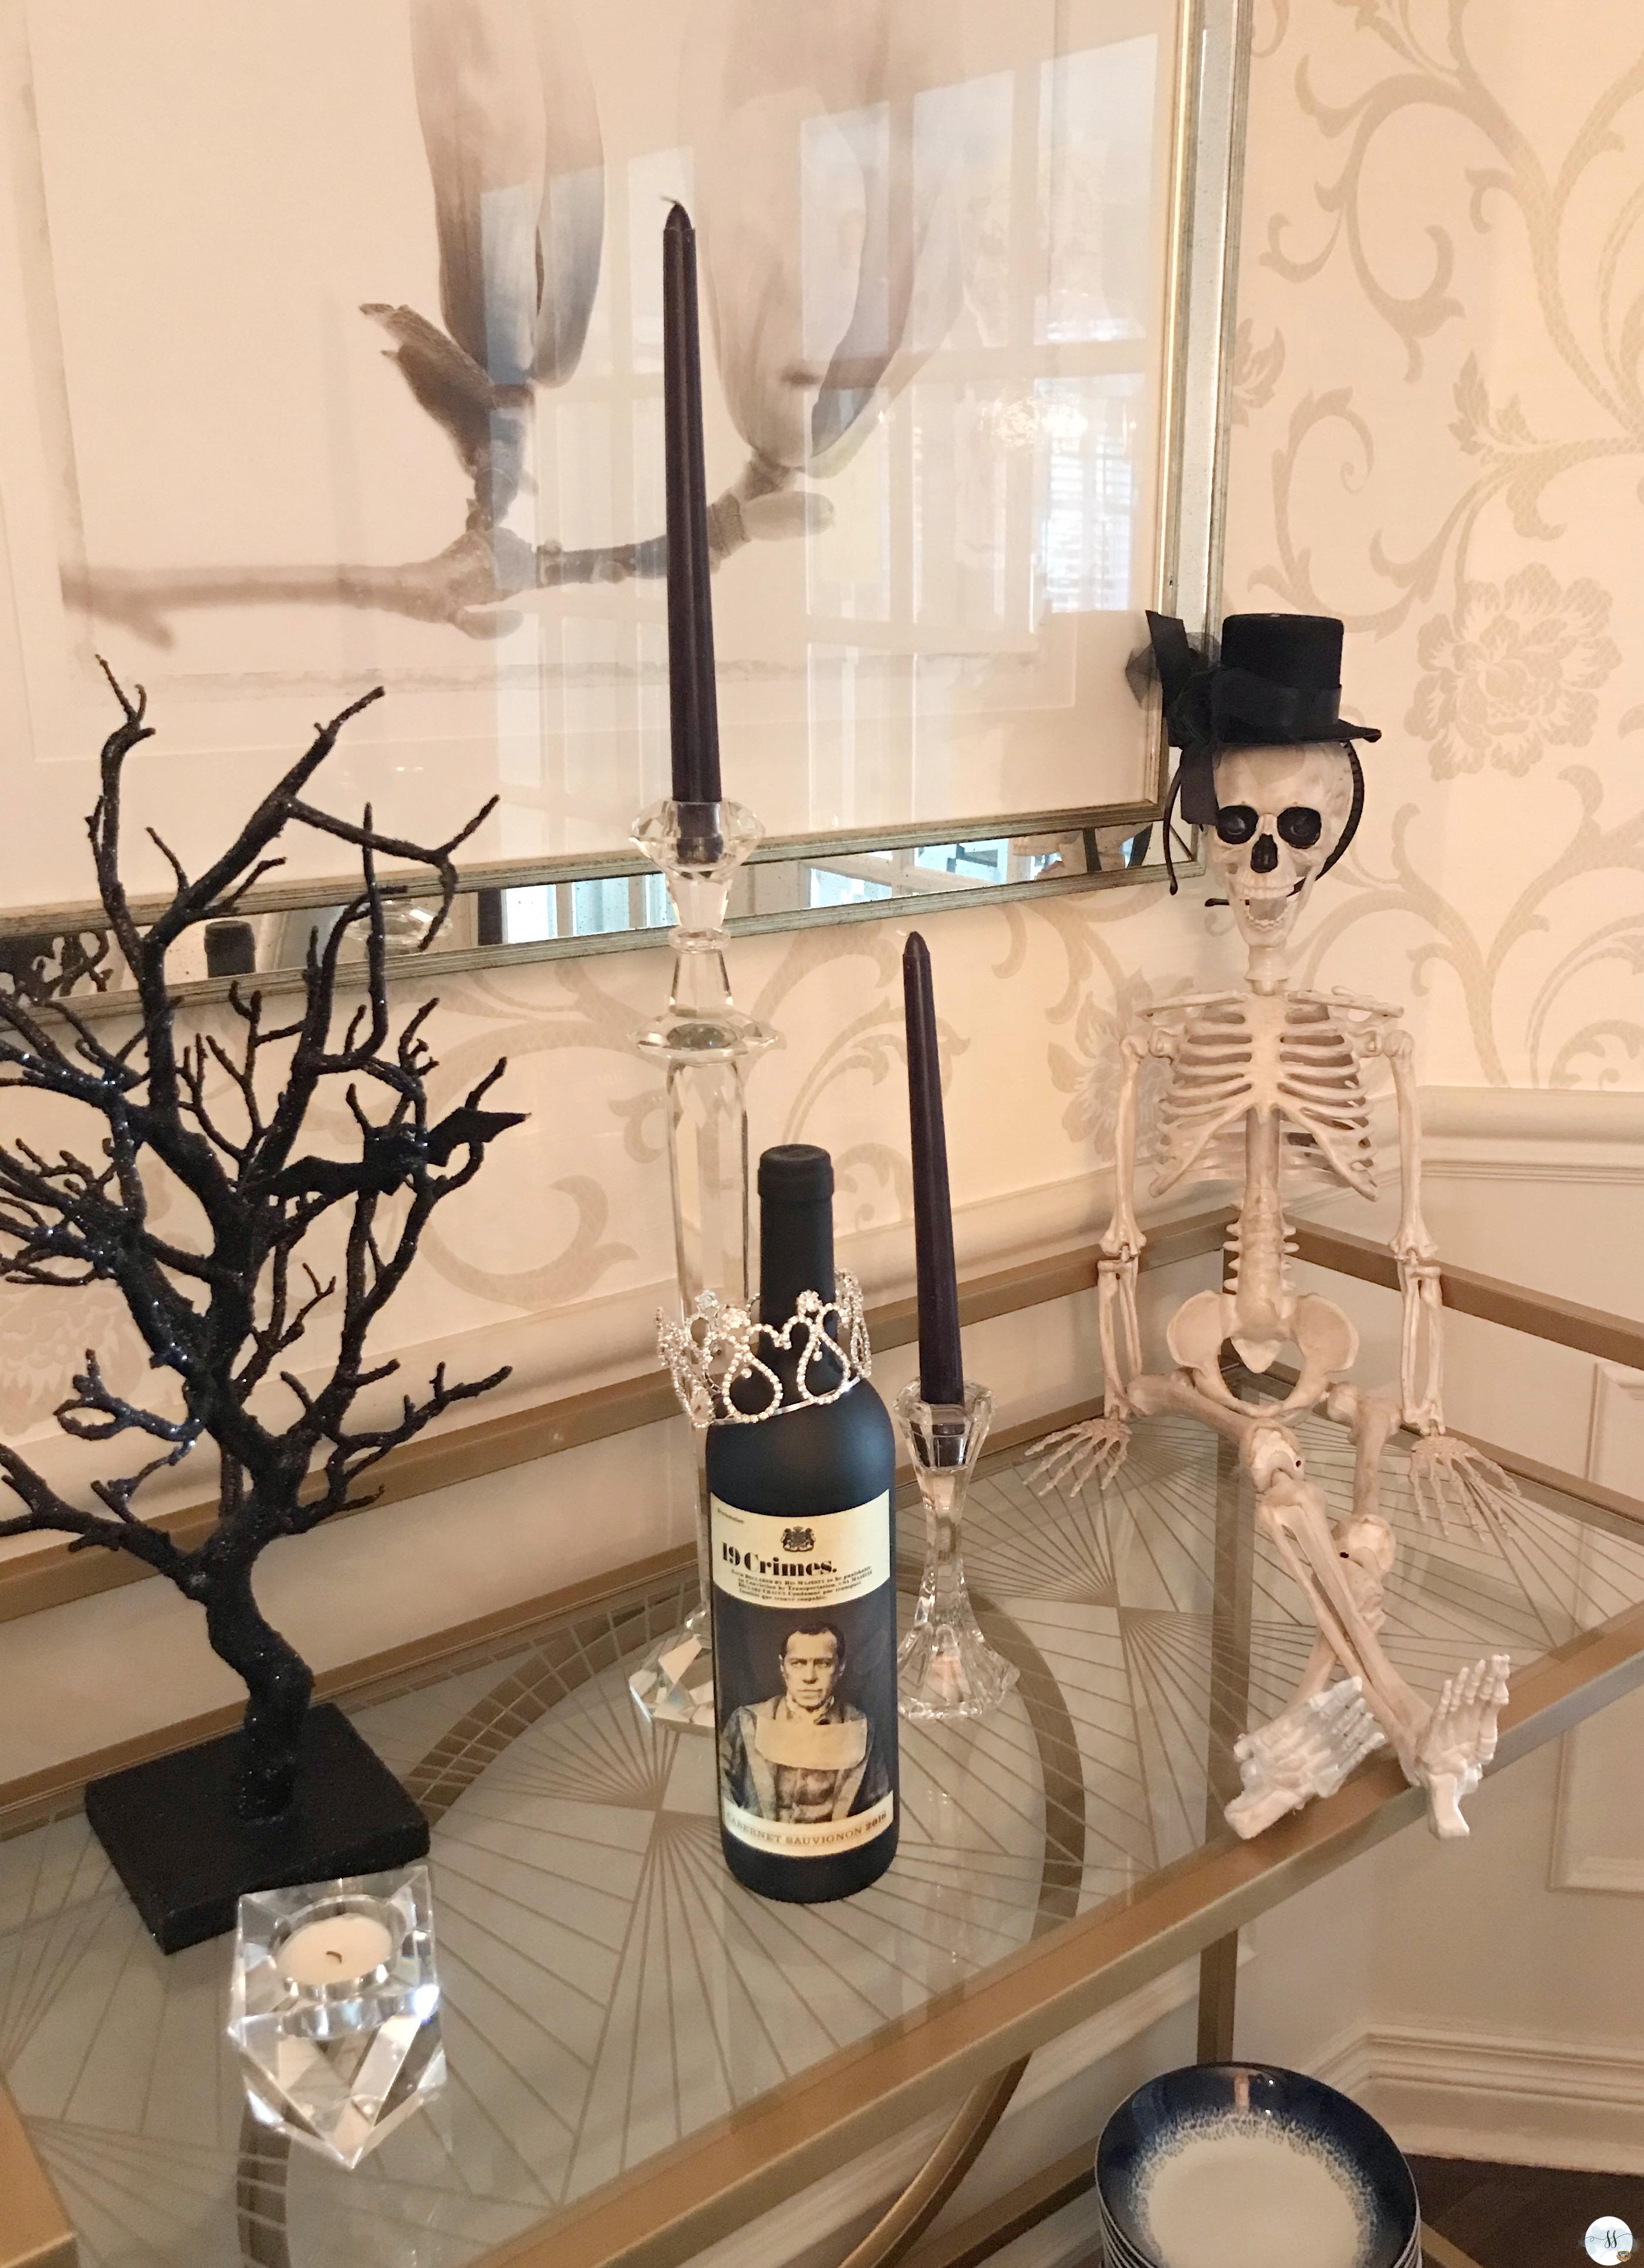 Fun gothic table scape for halloween